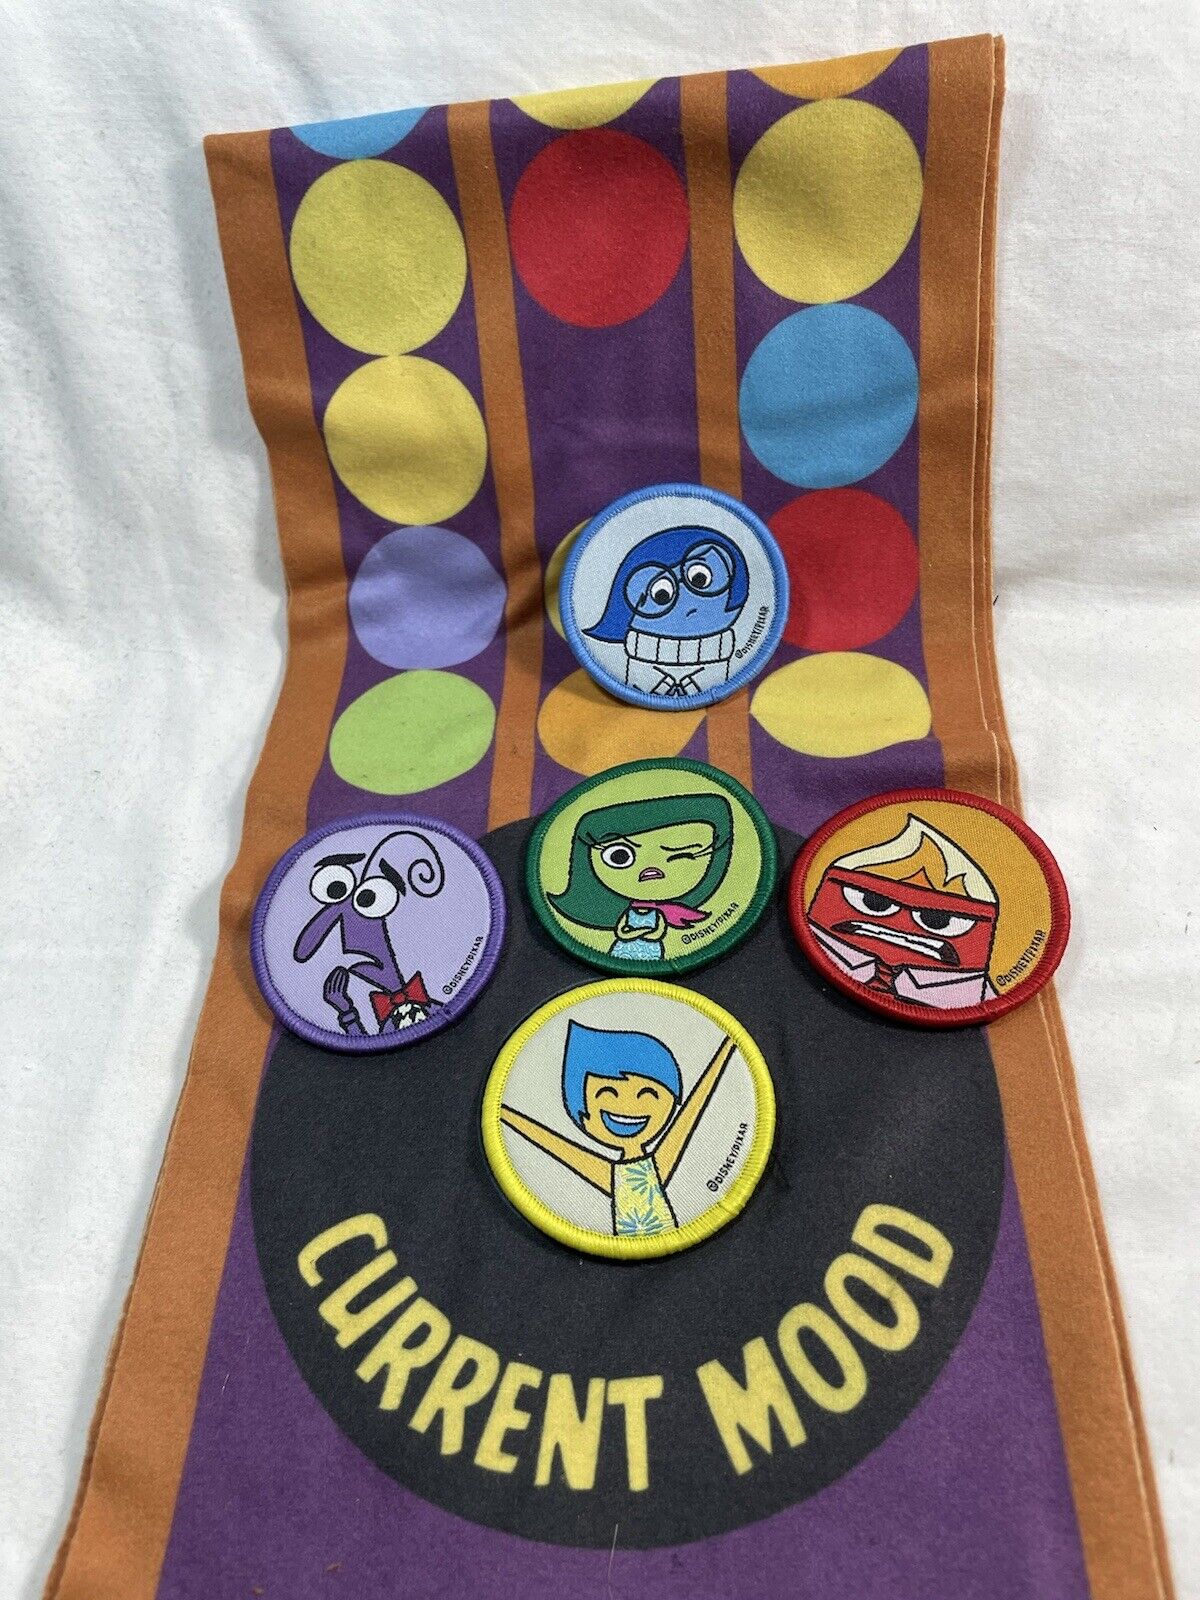 Disney Pixar INSIDE OUT Current Mood Scarf & 5 Mood Badges Loot Crate - New